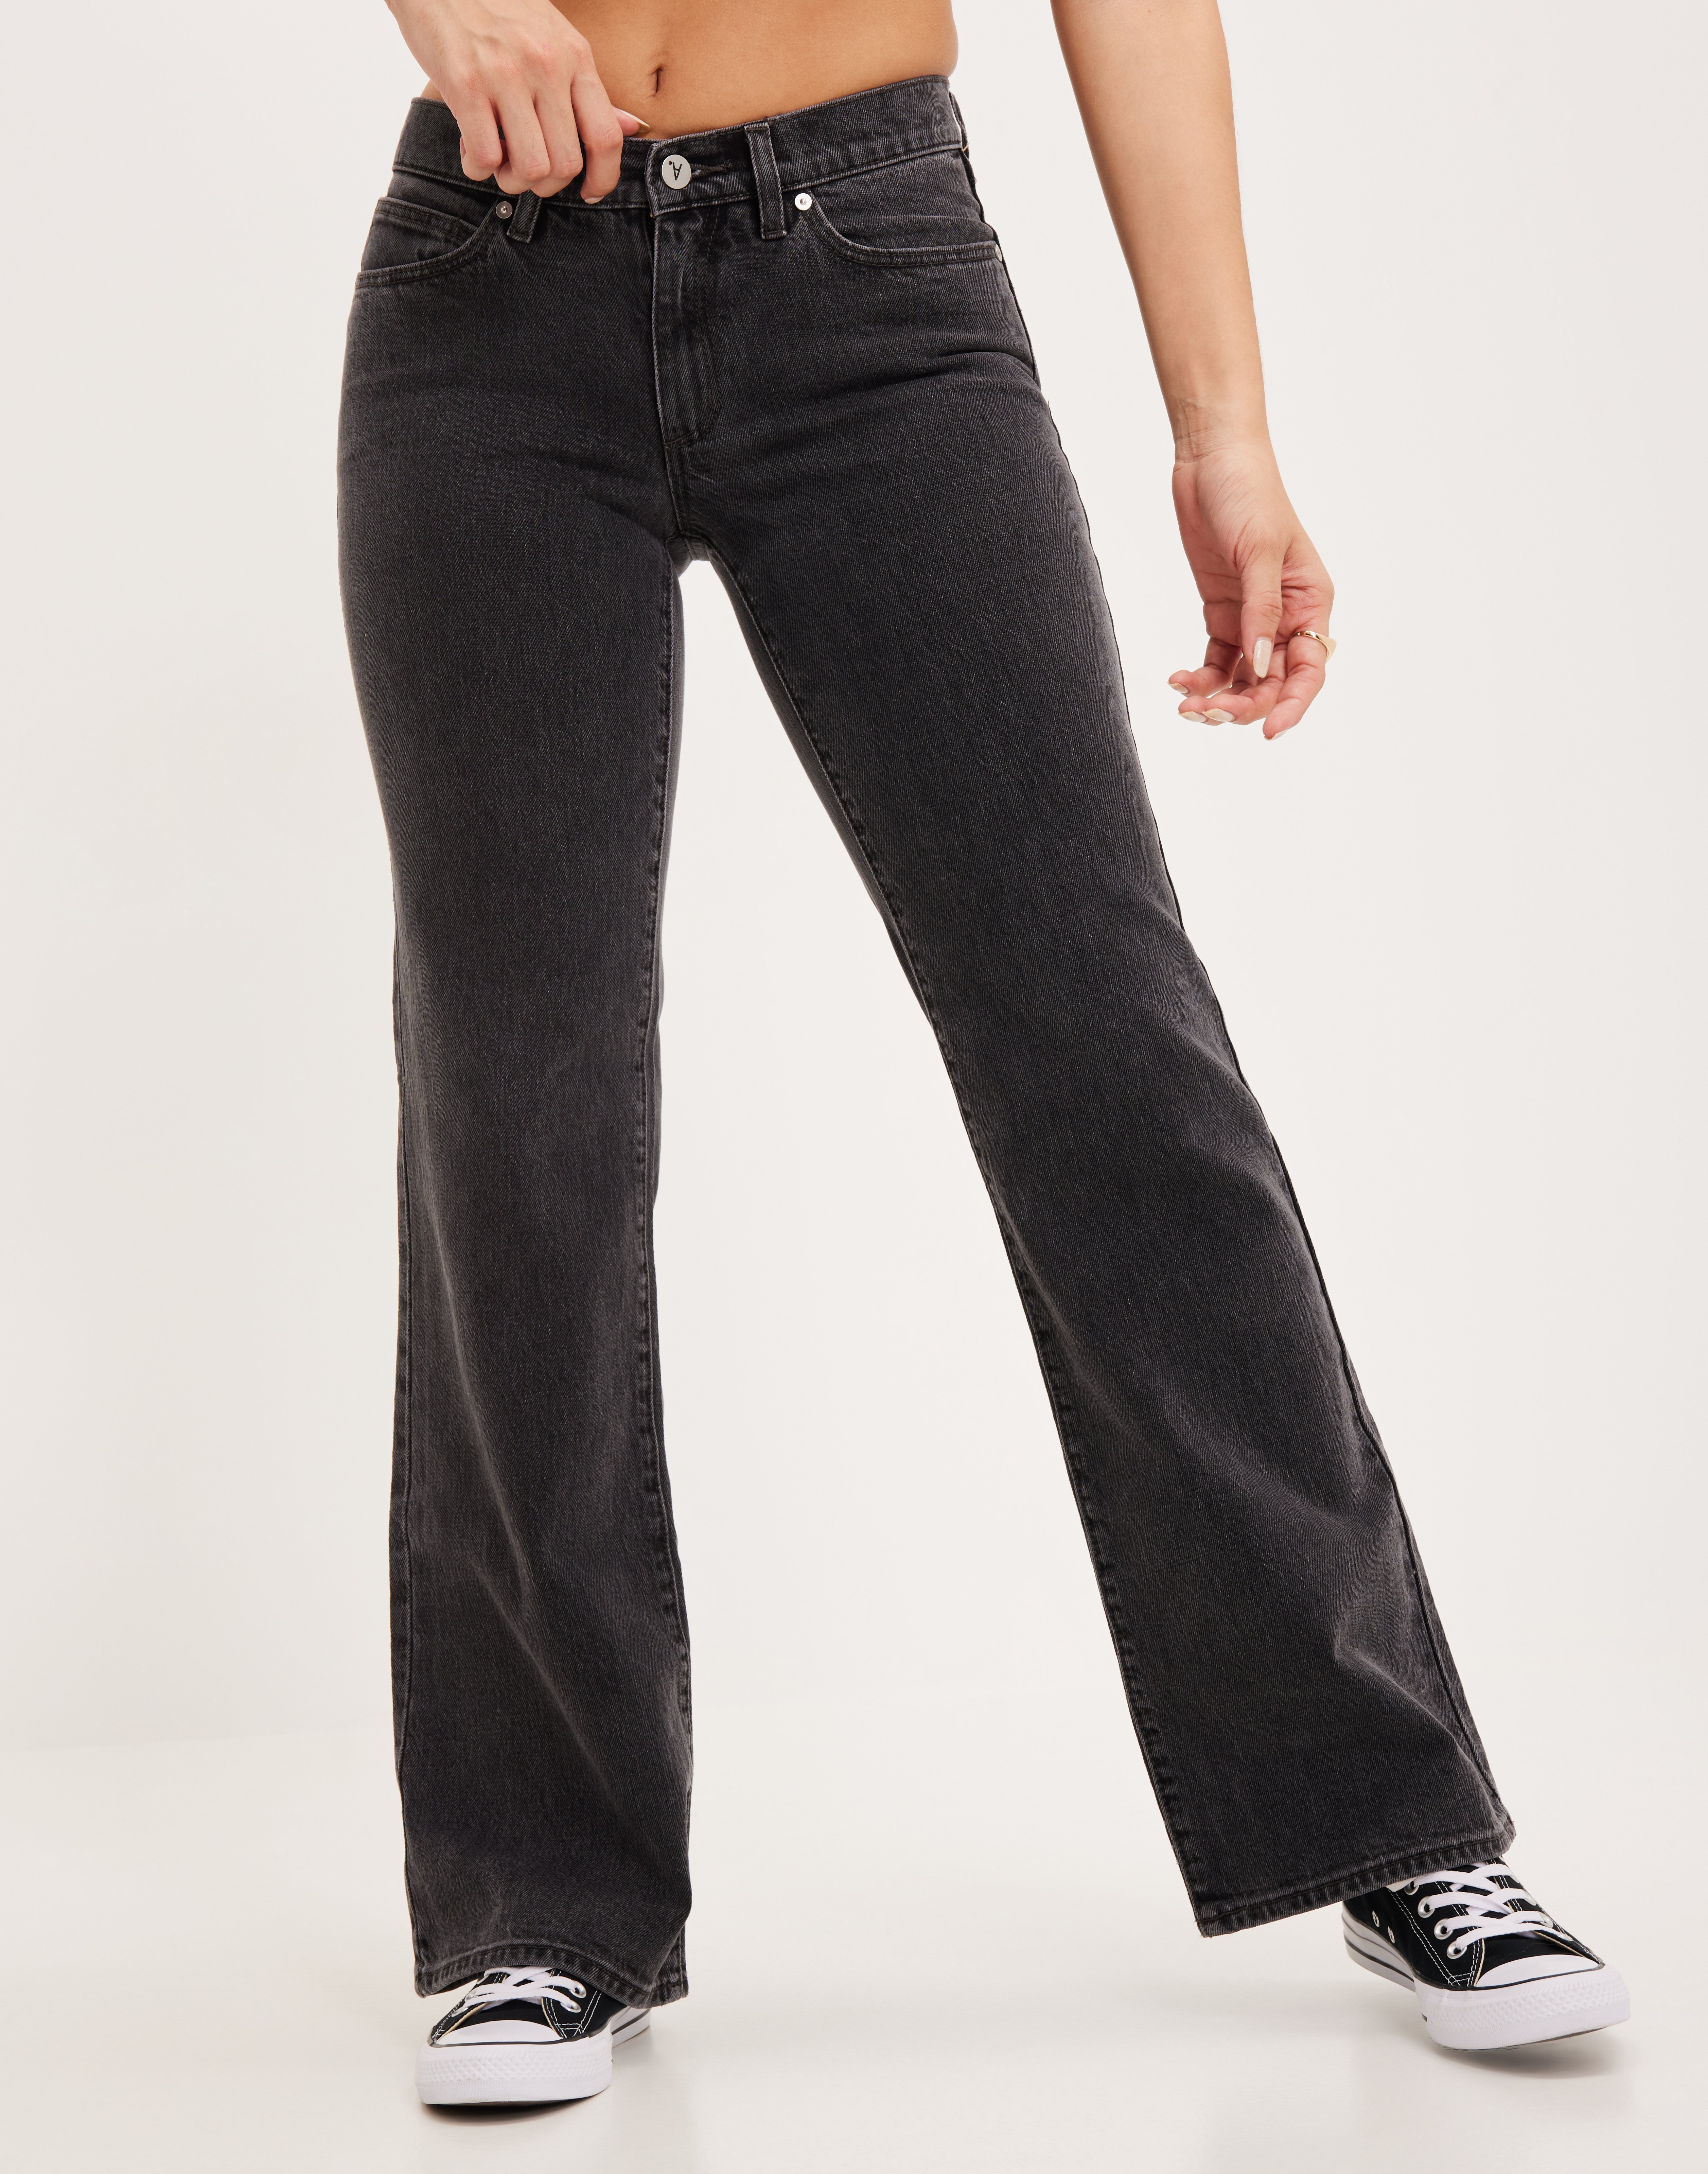 Abrand Jeans - Bootcut & Flare - A 99 Low Boot - Jeans - Bootcut & Flare